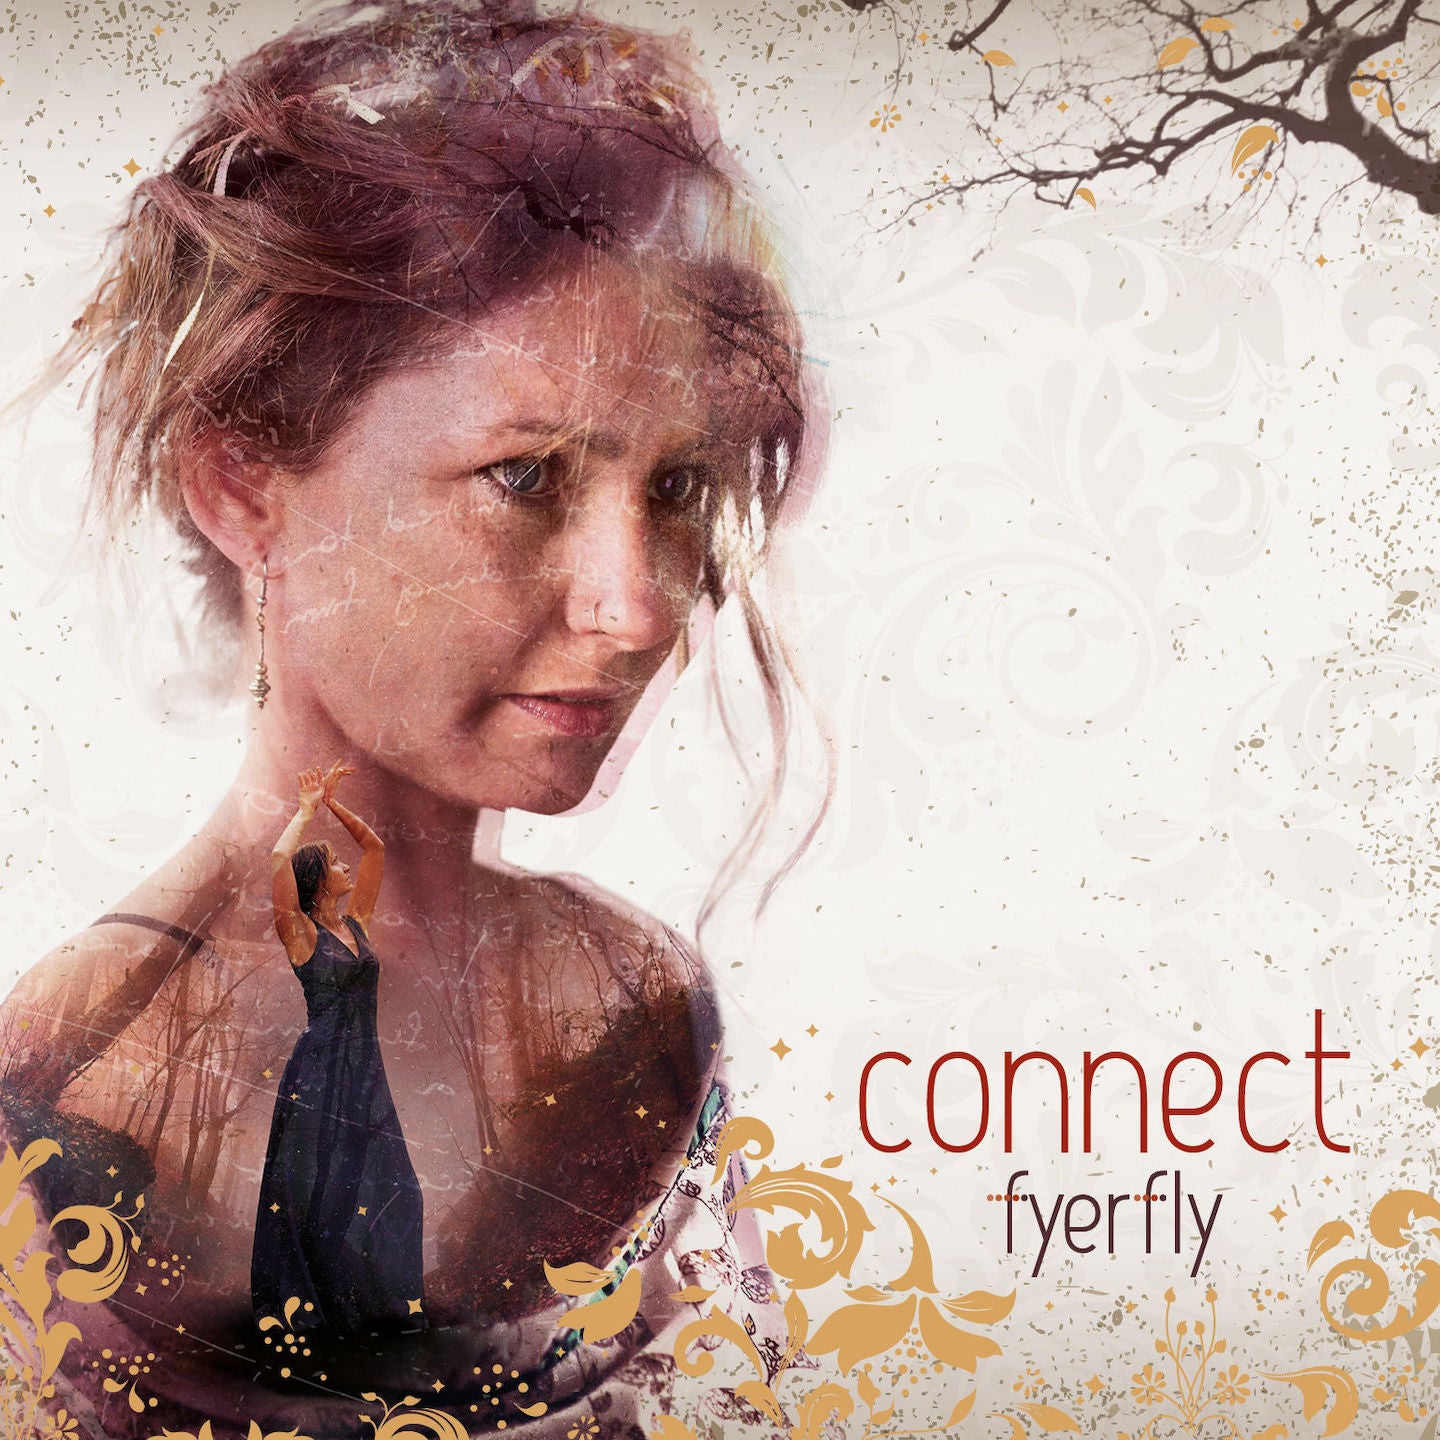 Disconnect is from the album 'Connect' by Fyerfly. Infusing elements of Alt Rock, Sadcore, Jazz and Blues, this deeply intimate and sultry album will soothe you as your soul is immersed in its serene and haunting sounds. A delicate and lonely song about feeling empty and lost. Of drifting through a life that's lost its colour, of wanting and preparing to connect.